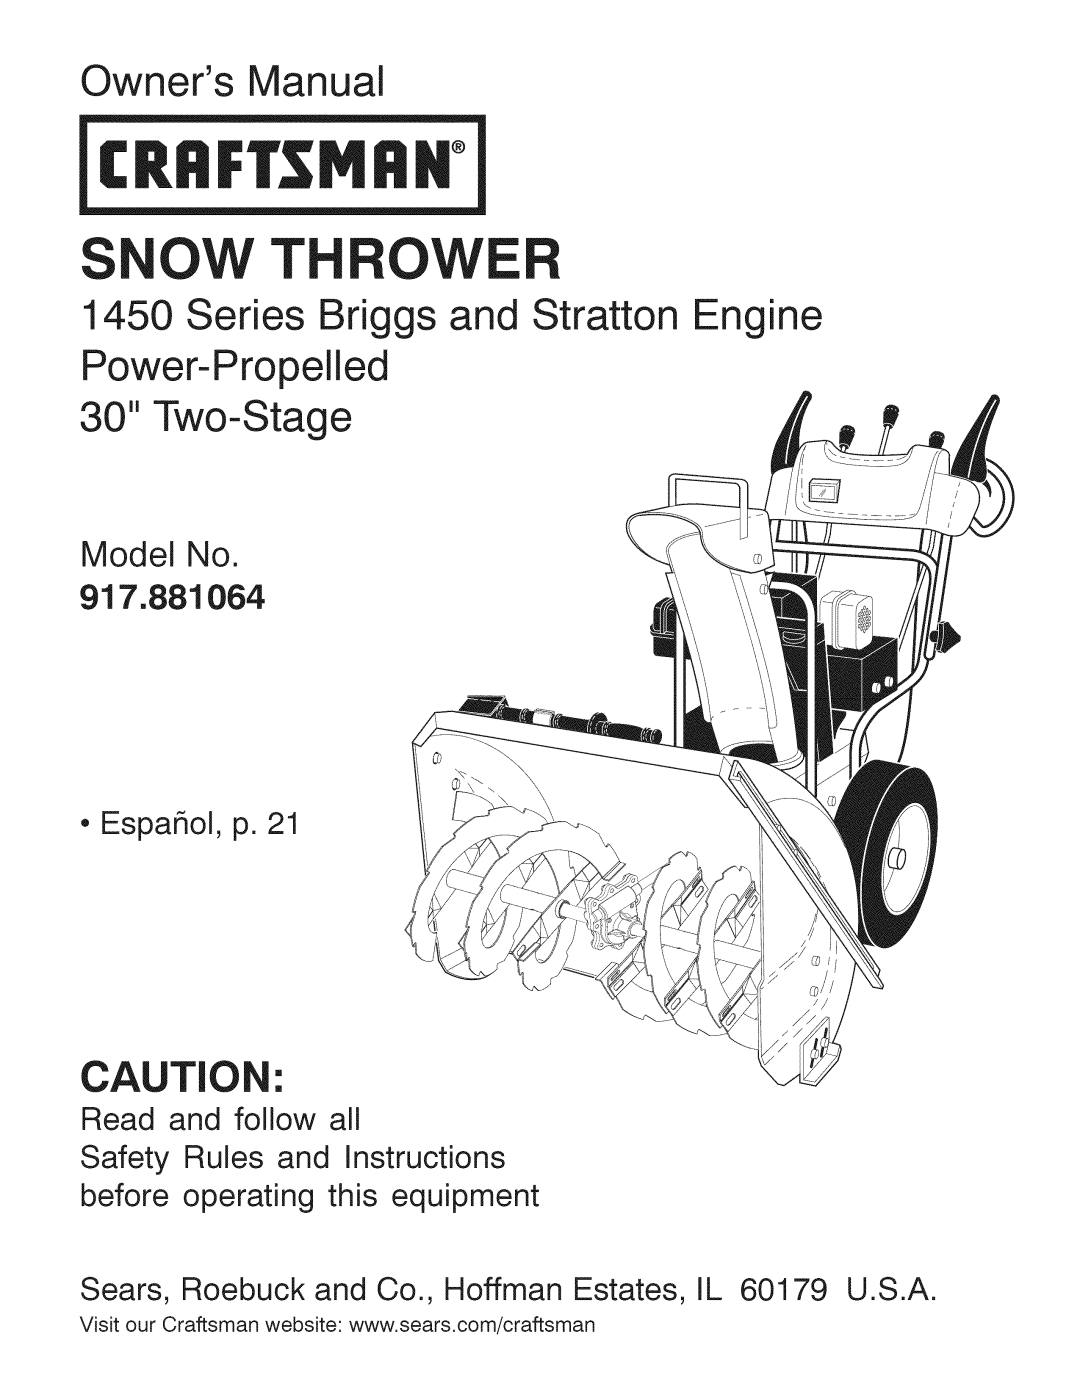 Craftsman 917.881064 owner manual Owners Manual, Series Briggs and Stratton Engine, Power-Propelled 30 Two-Stage, Cautio 